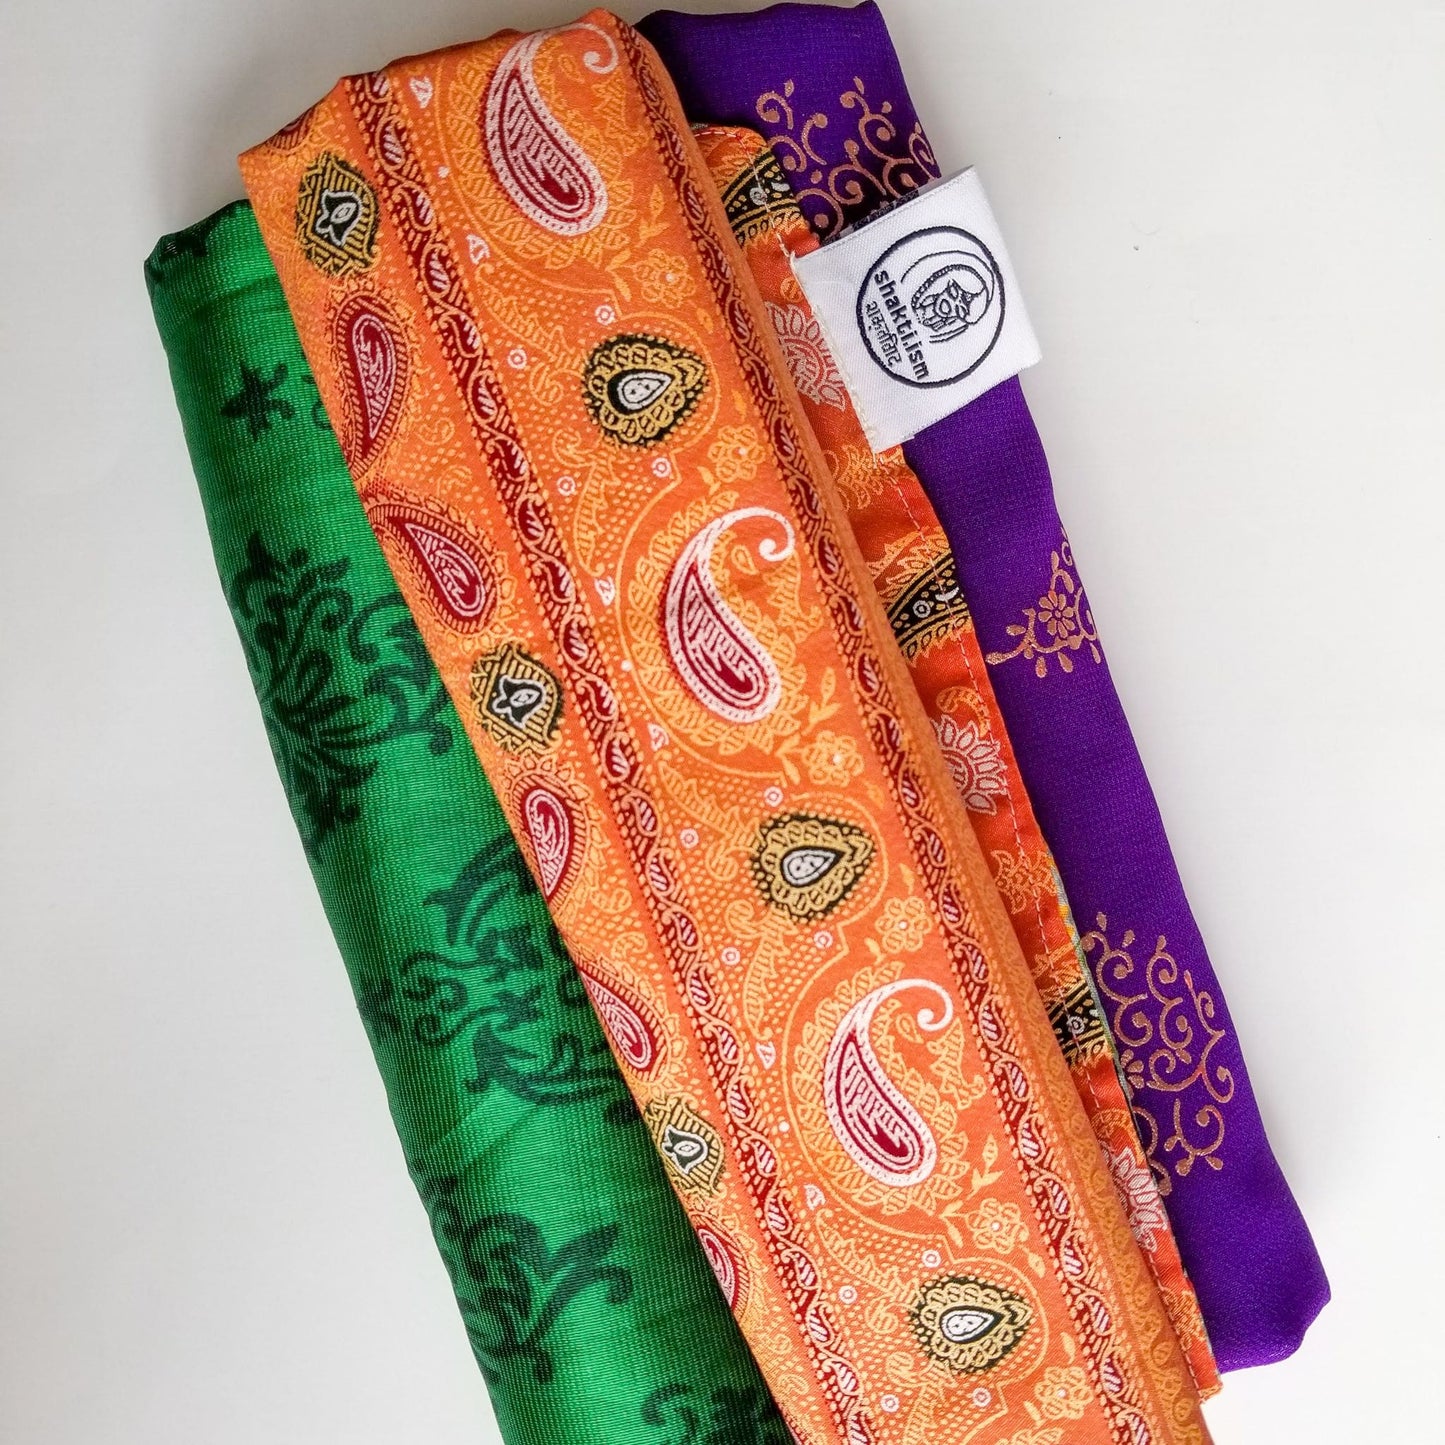 Reusable Fabric Gift Wrap - Upcycled and Reversible Gift wrap in one-of-a-kind designs